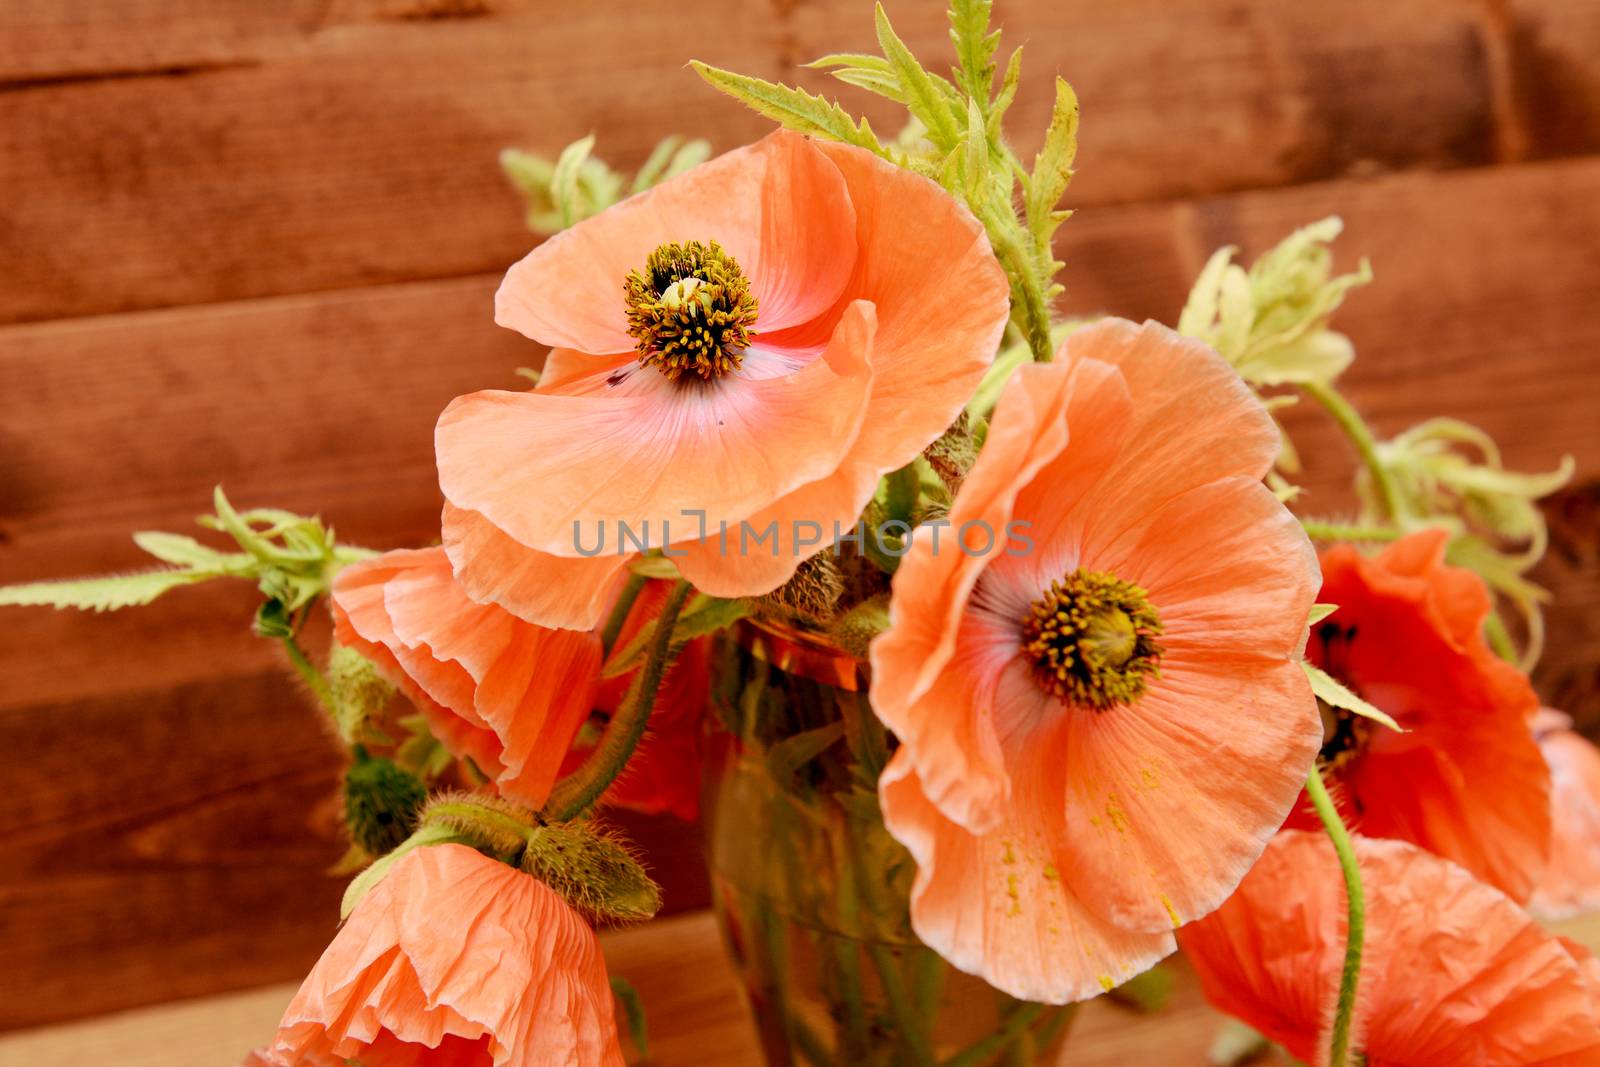 Pale pink poppies picked from the garden, in a vase against a wooden background